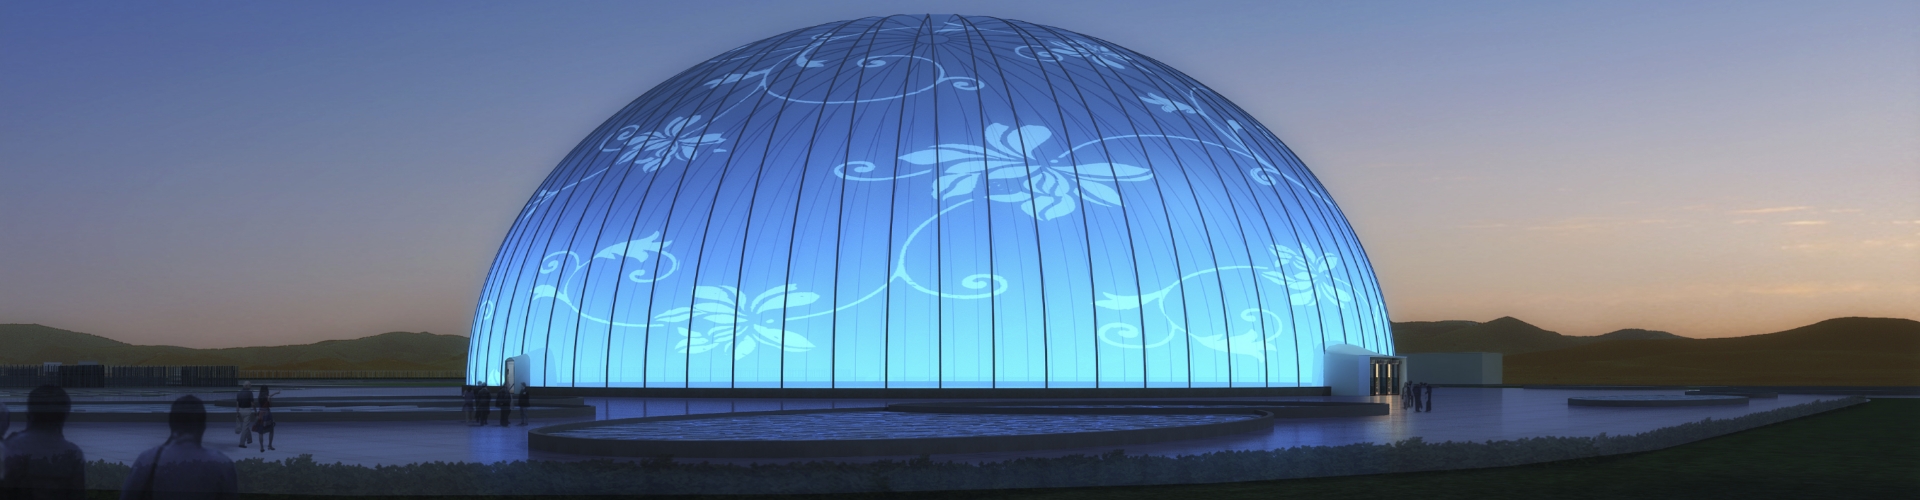 Water Park Dome